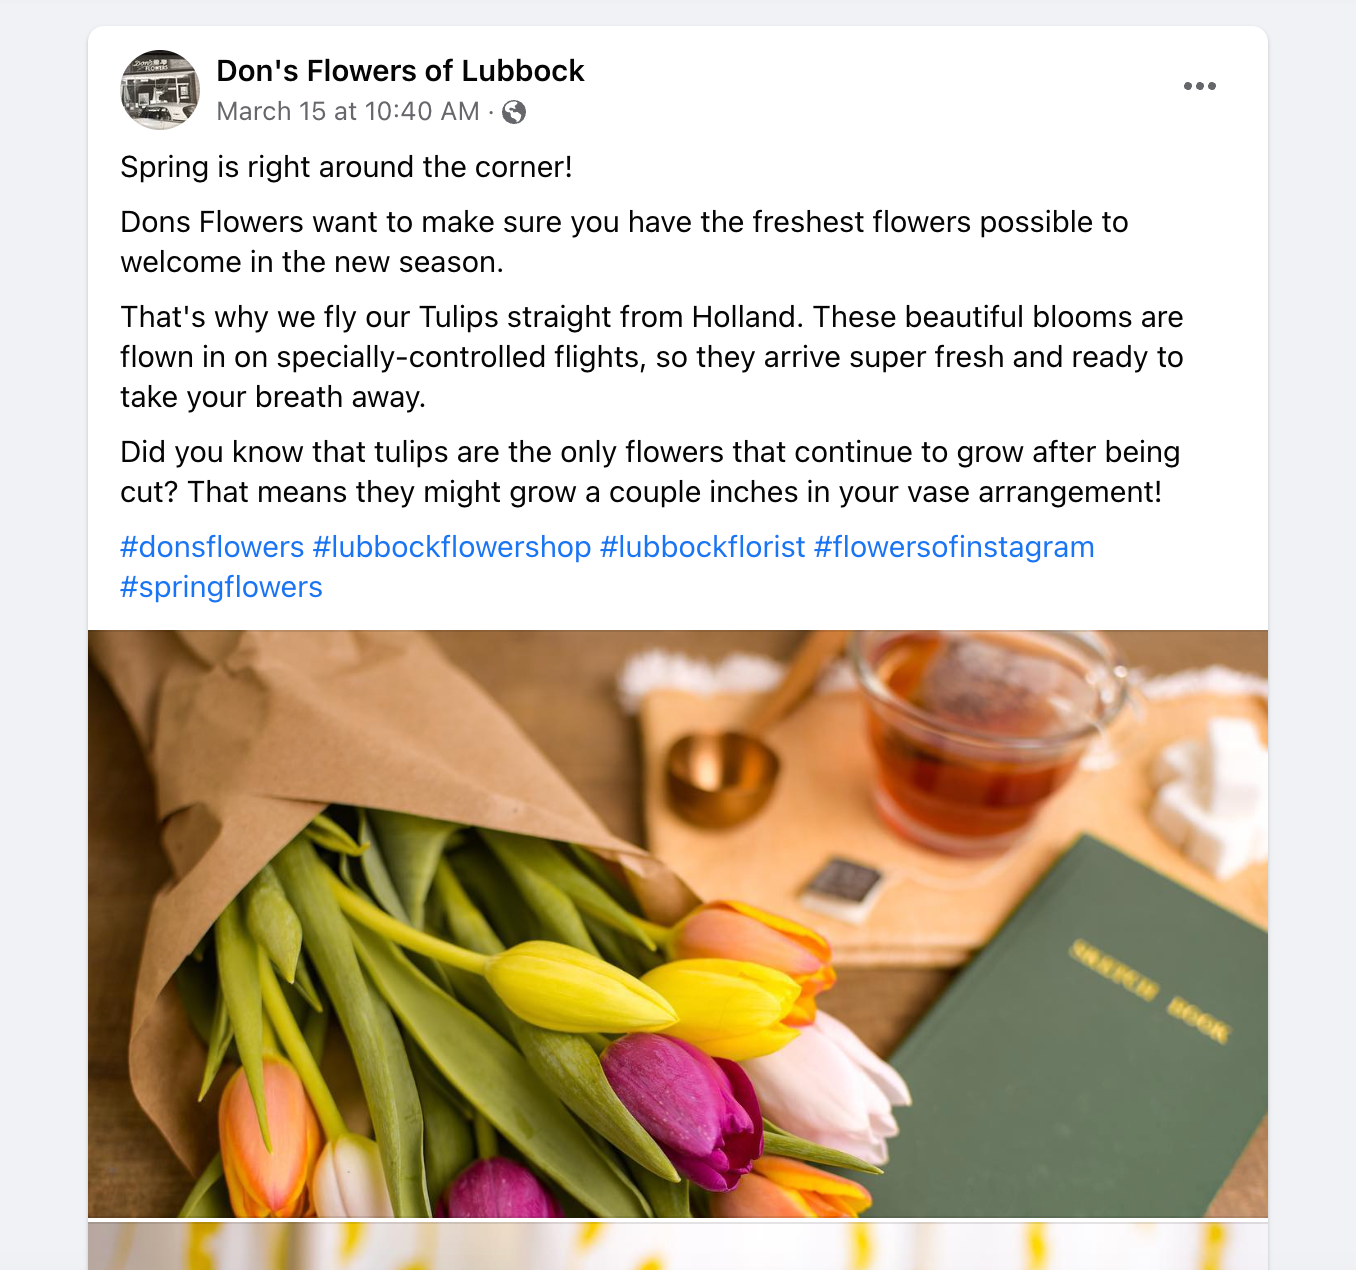 A social post about flowers